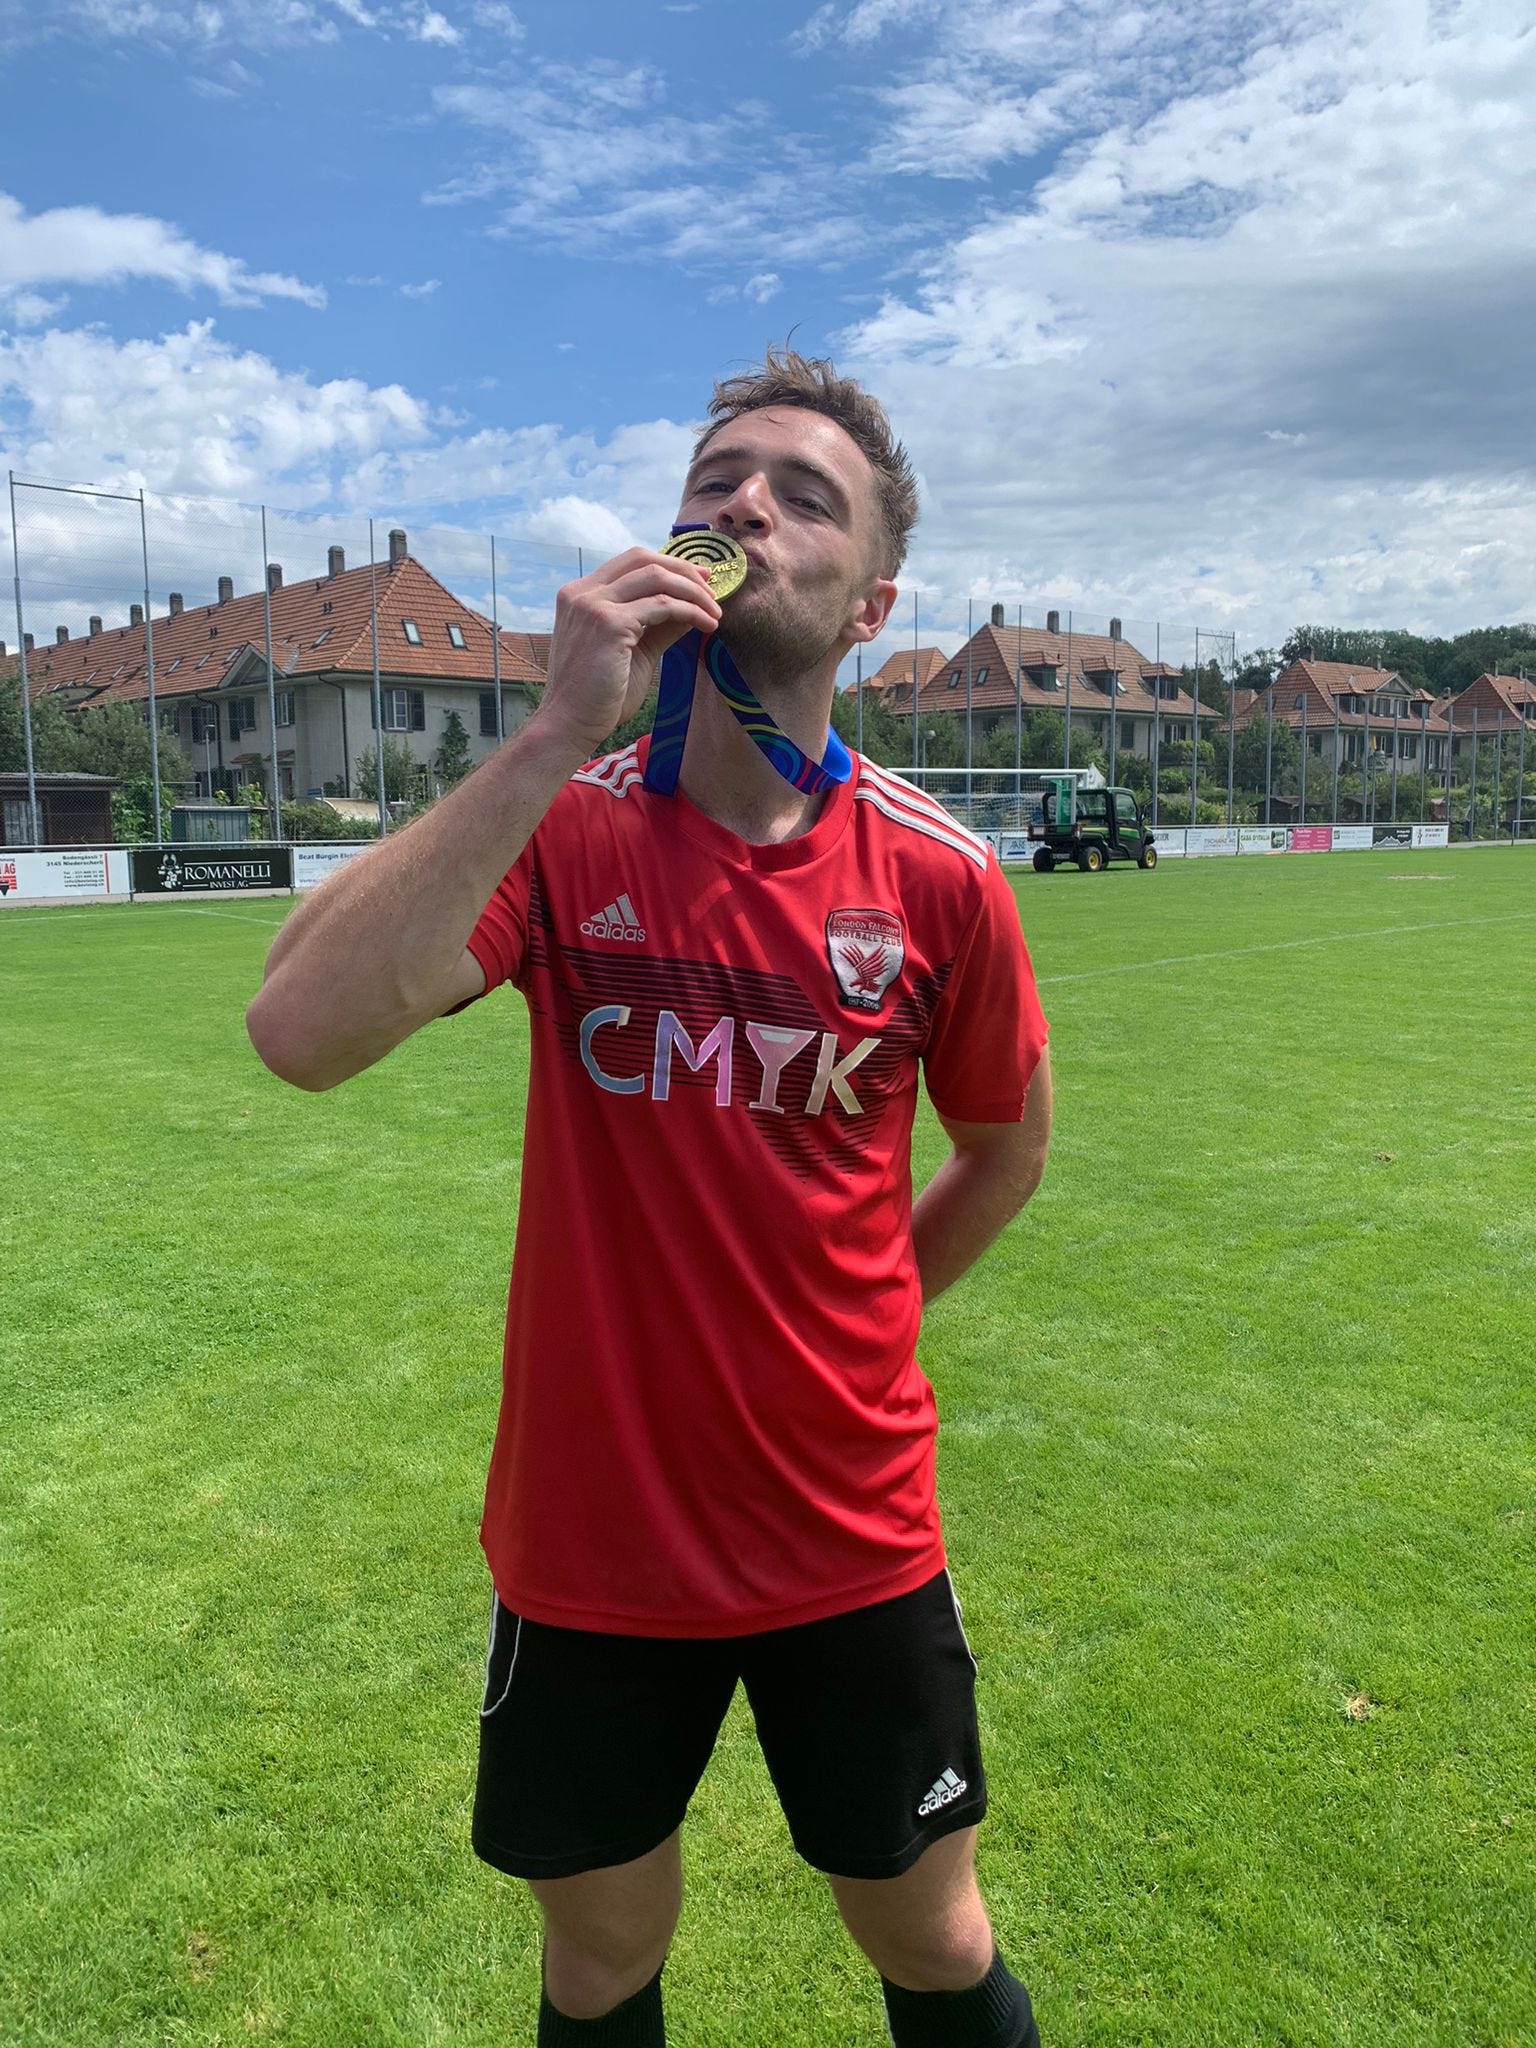 On a football pitch, Will - a white man with short brown hair - kisses his medal. He's wearing a red adidas football shirt with a falcon on the crest and black shorts.